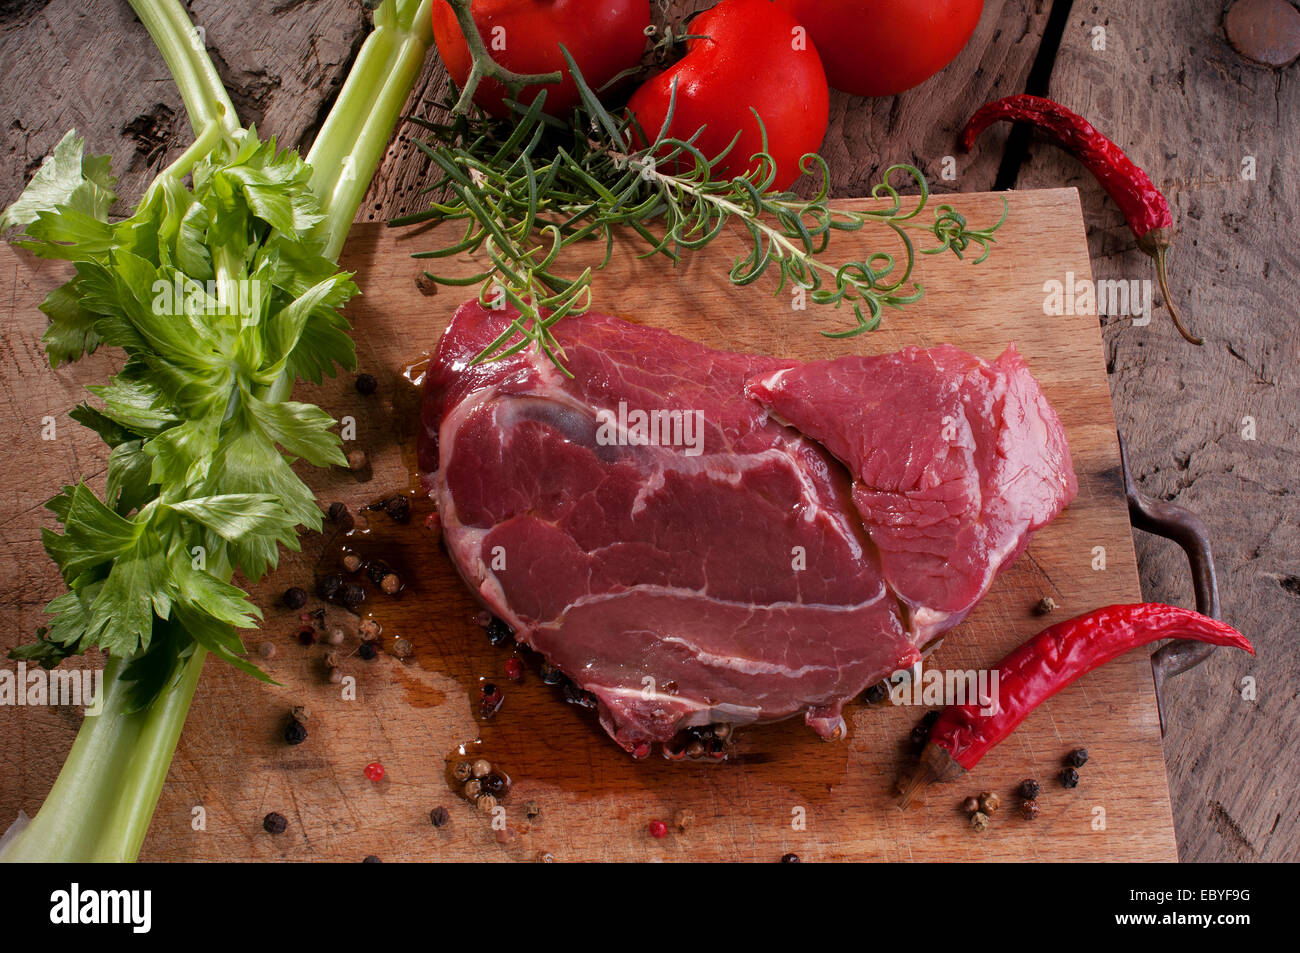 a beef steak on a wooden cutting board ready for the barbecue Stock Photo